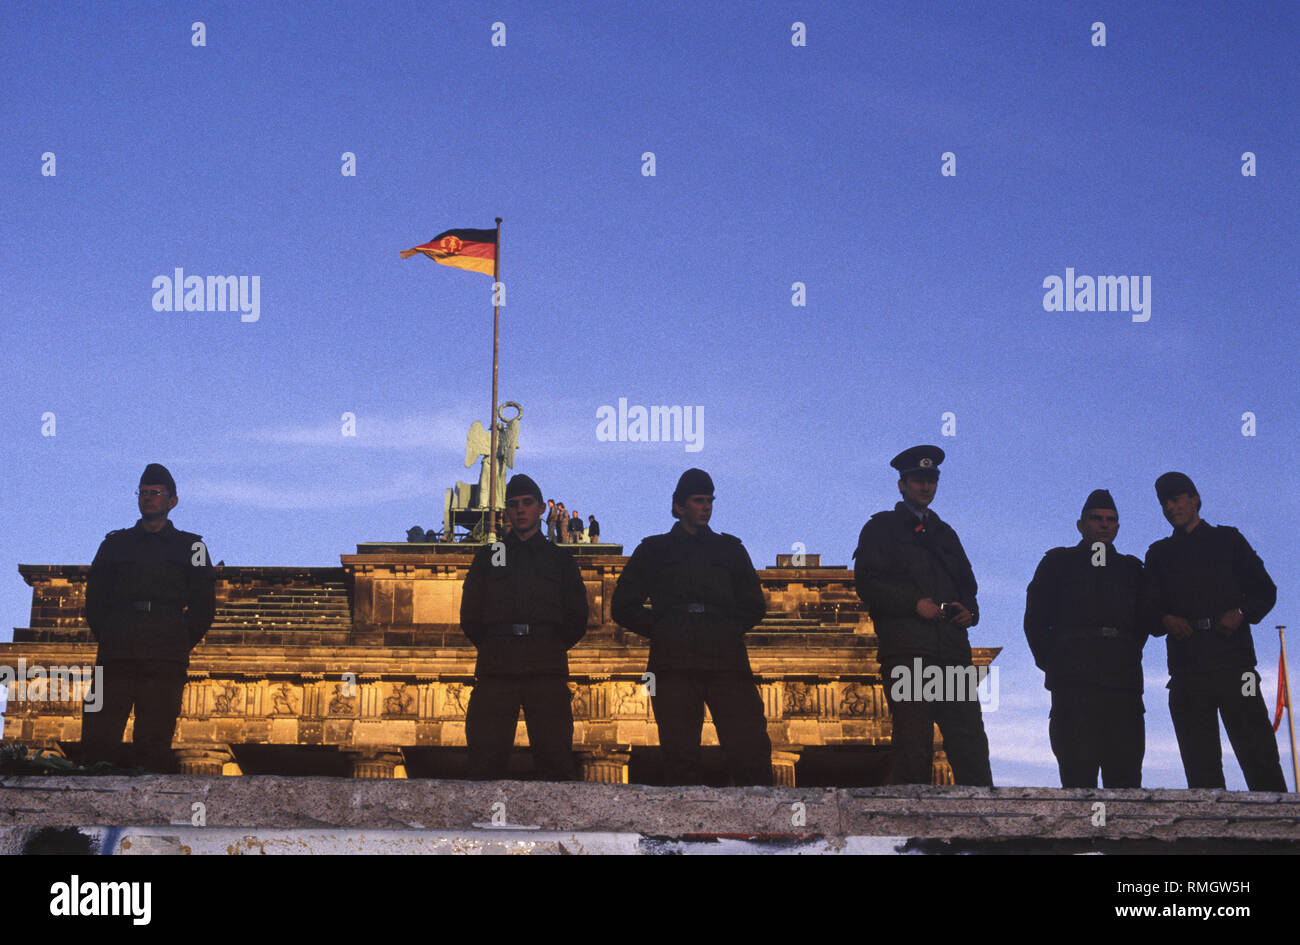 Thousands of East and West Berliners celebrate the opening of the border on the Berlin Wall at the Brandenburg Gate.  GDR frontier guards prevent people from entering the restricted area at the square in front of the Brandenburg Gate and the Pariser Platz. Stock Photo